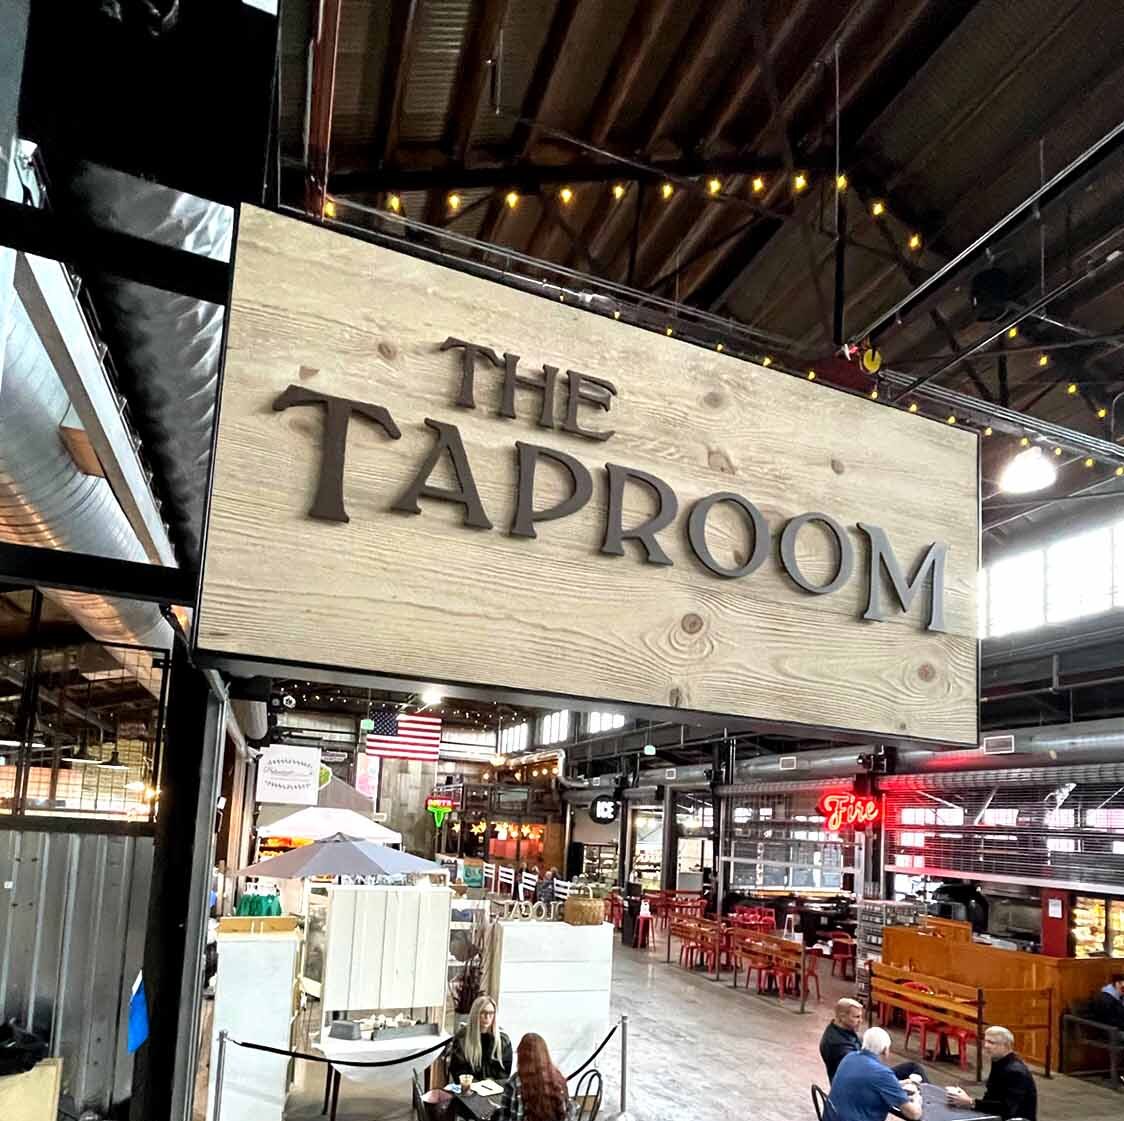 The Taproom by Hellbent in Wenatchee sign